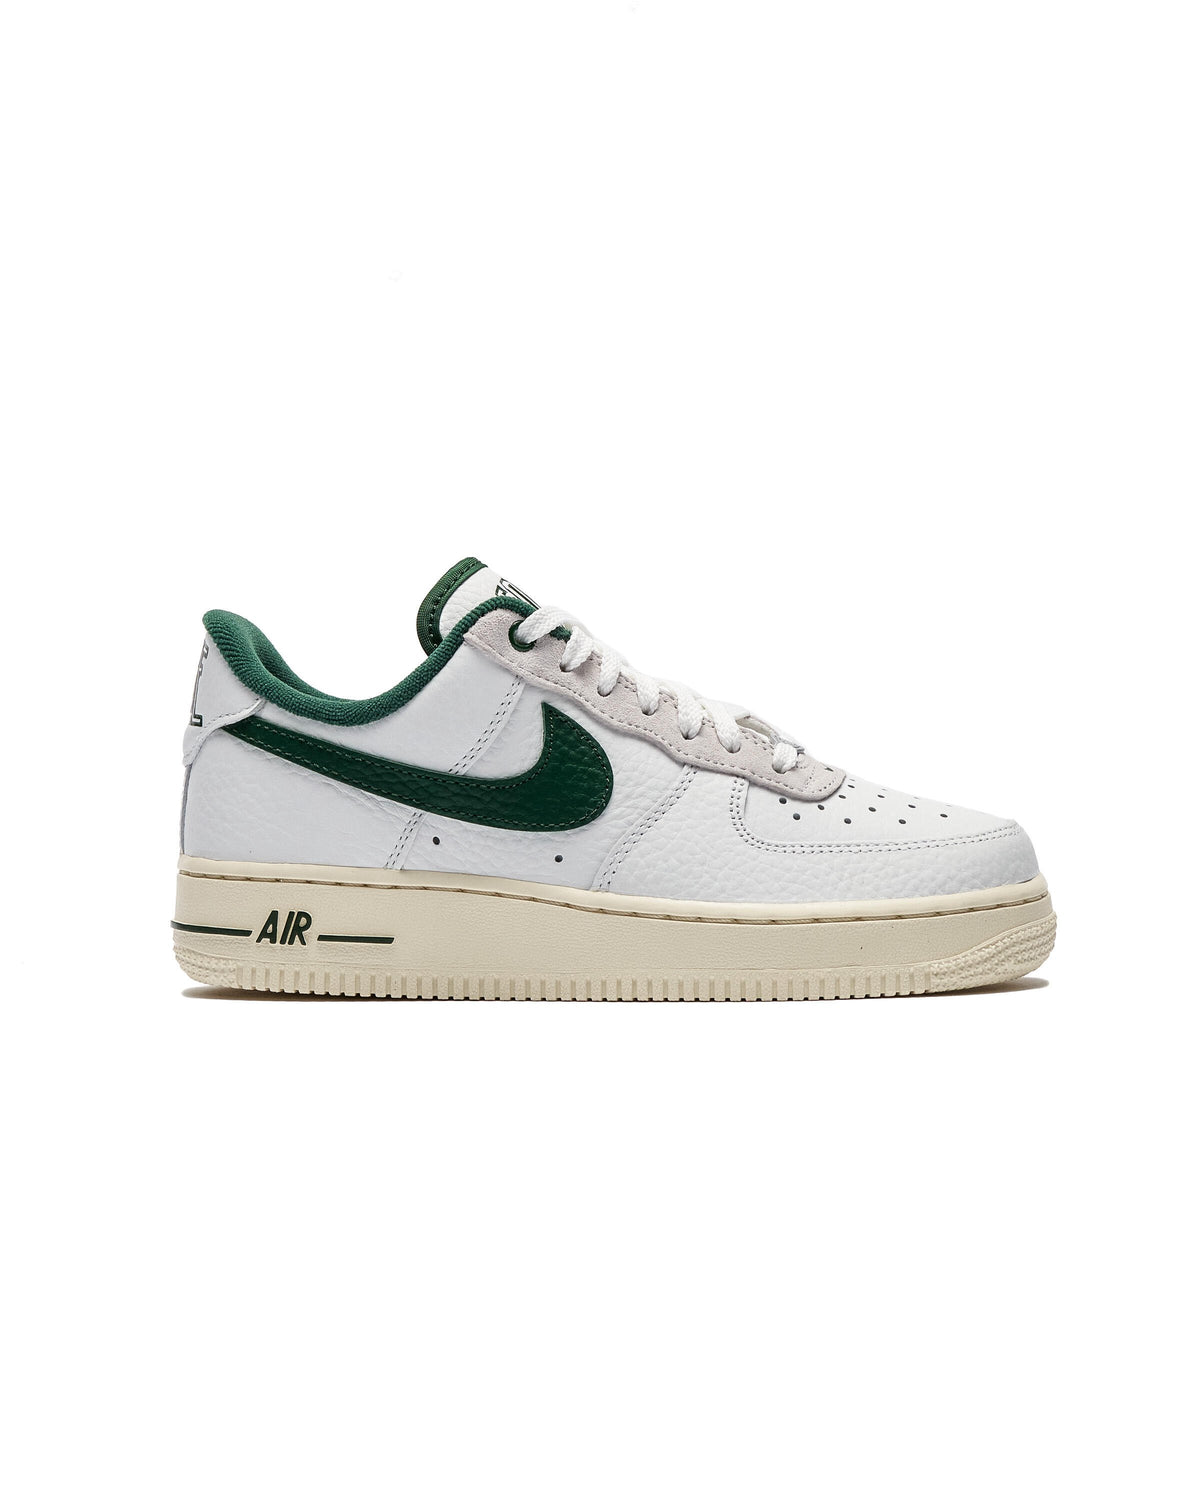 Nike WMNS AIR FORCE 1 '07 LX 'Command Force'